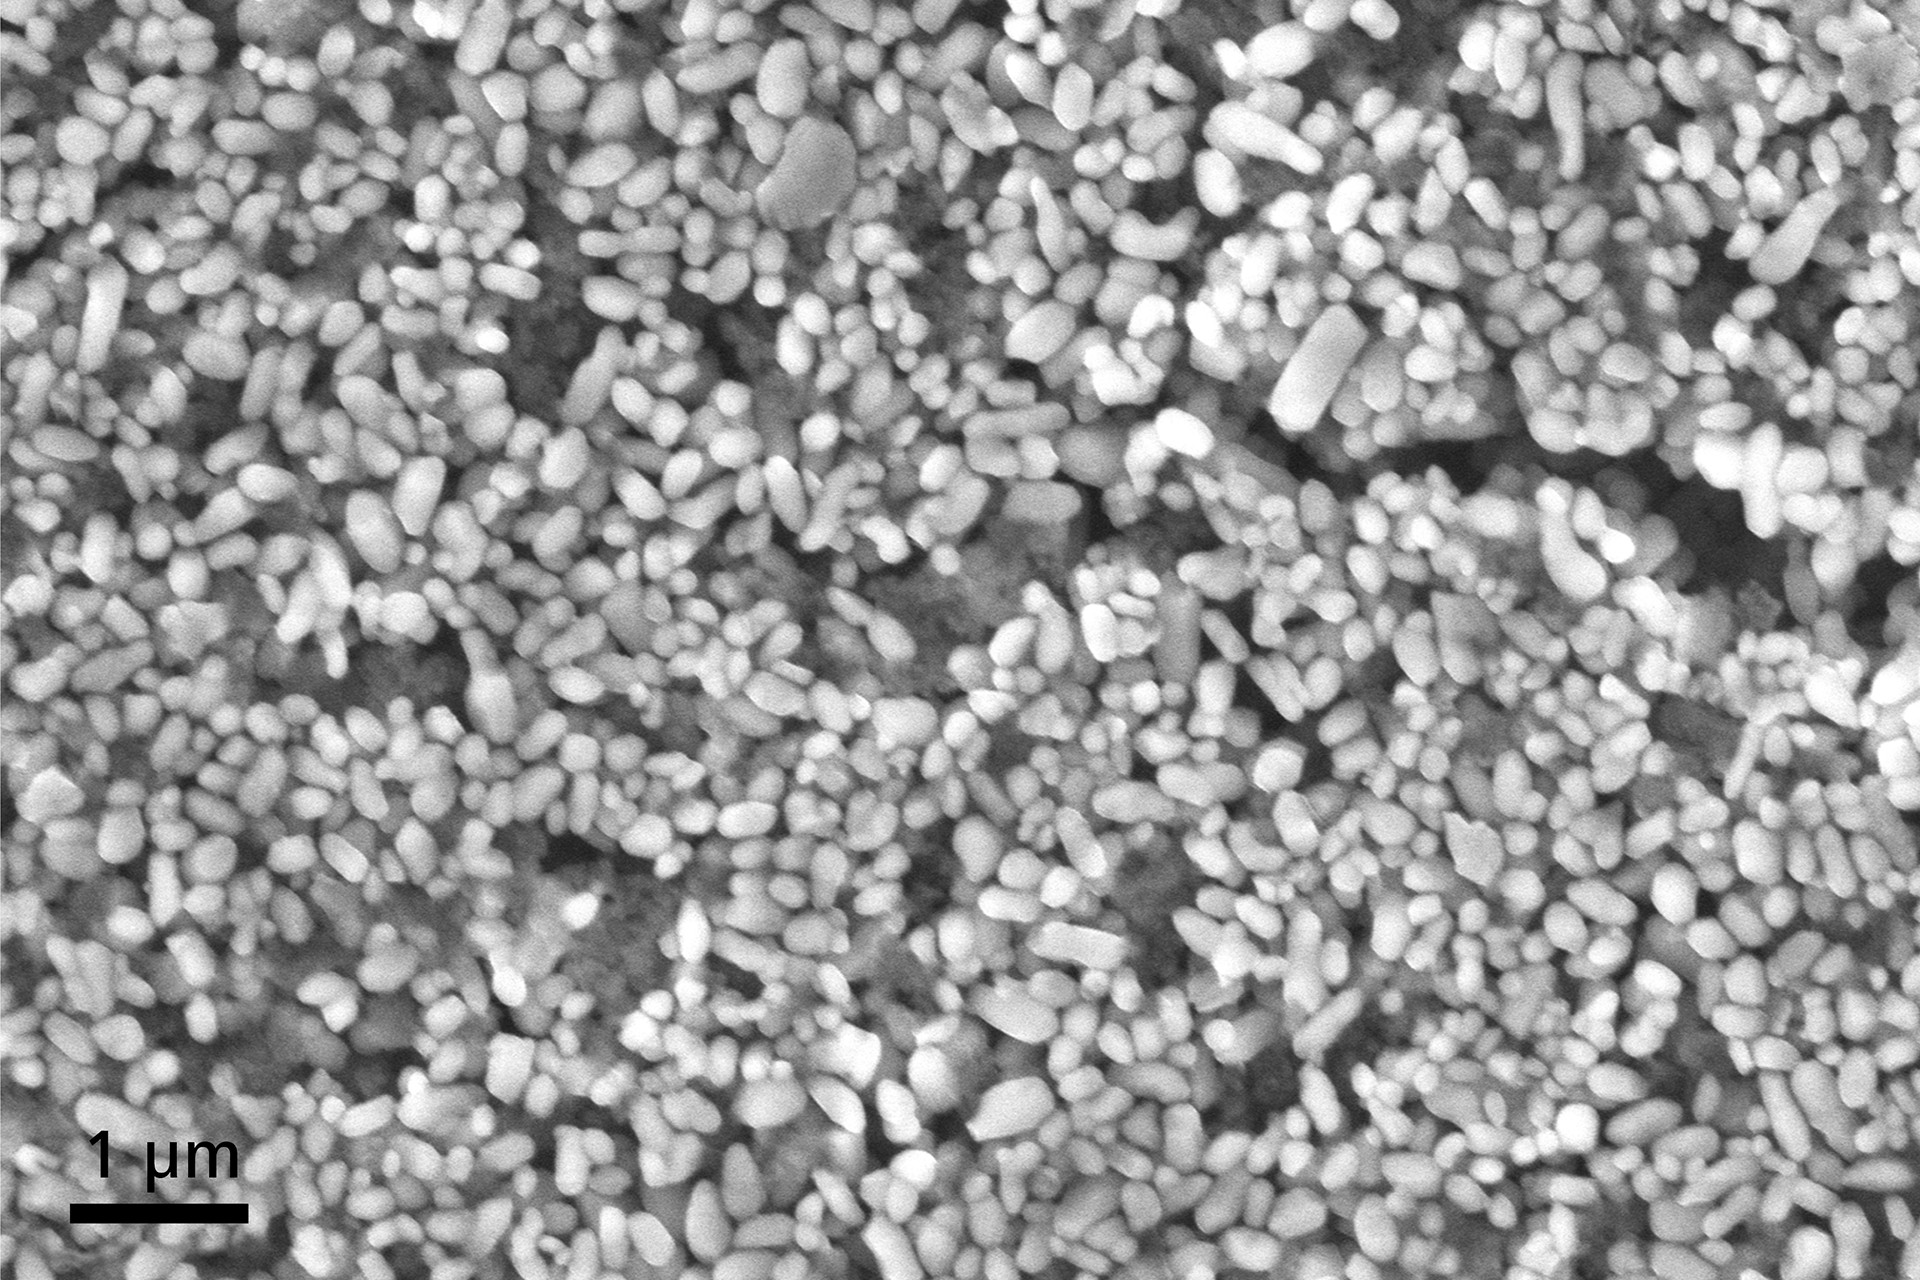 Non-conductive titanium dioxide nanoparticles used as pigments and opacifying agents can be imaged easily at 40 Pa in VP mode with the C2D detector, image width 10 µm.